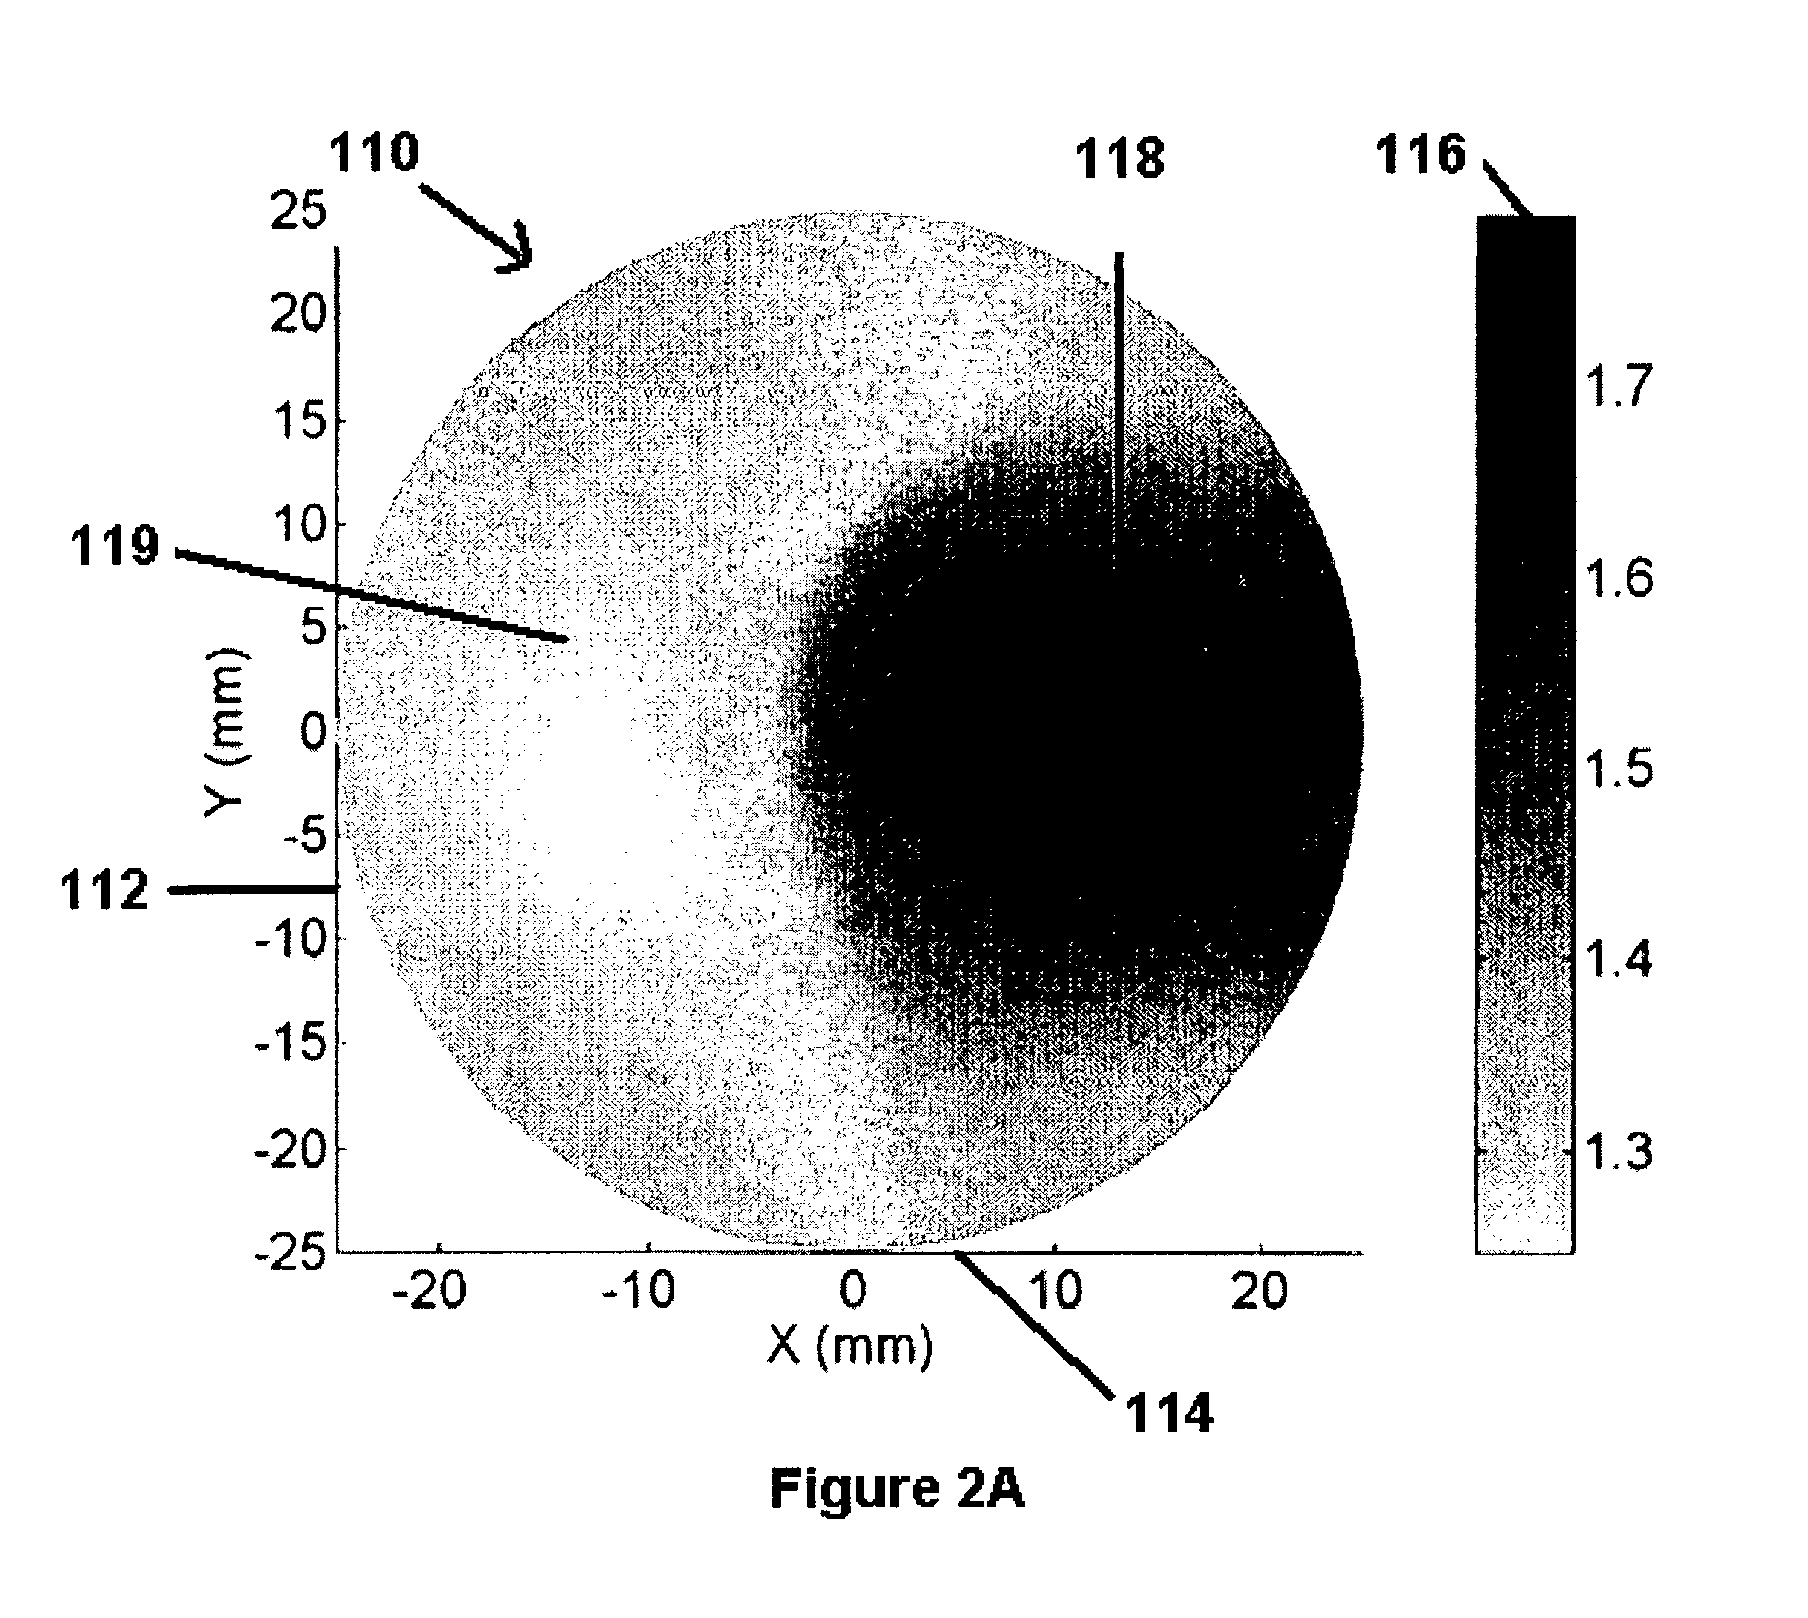 Reconstructed refractive index spatial maps and method with algorithm